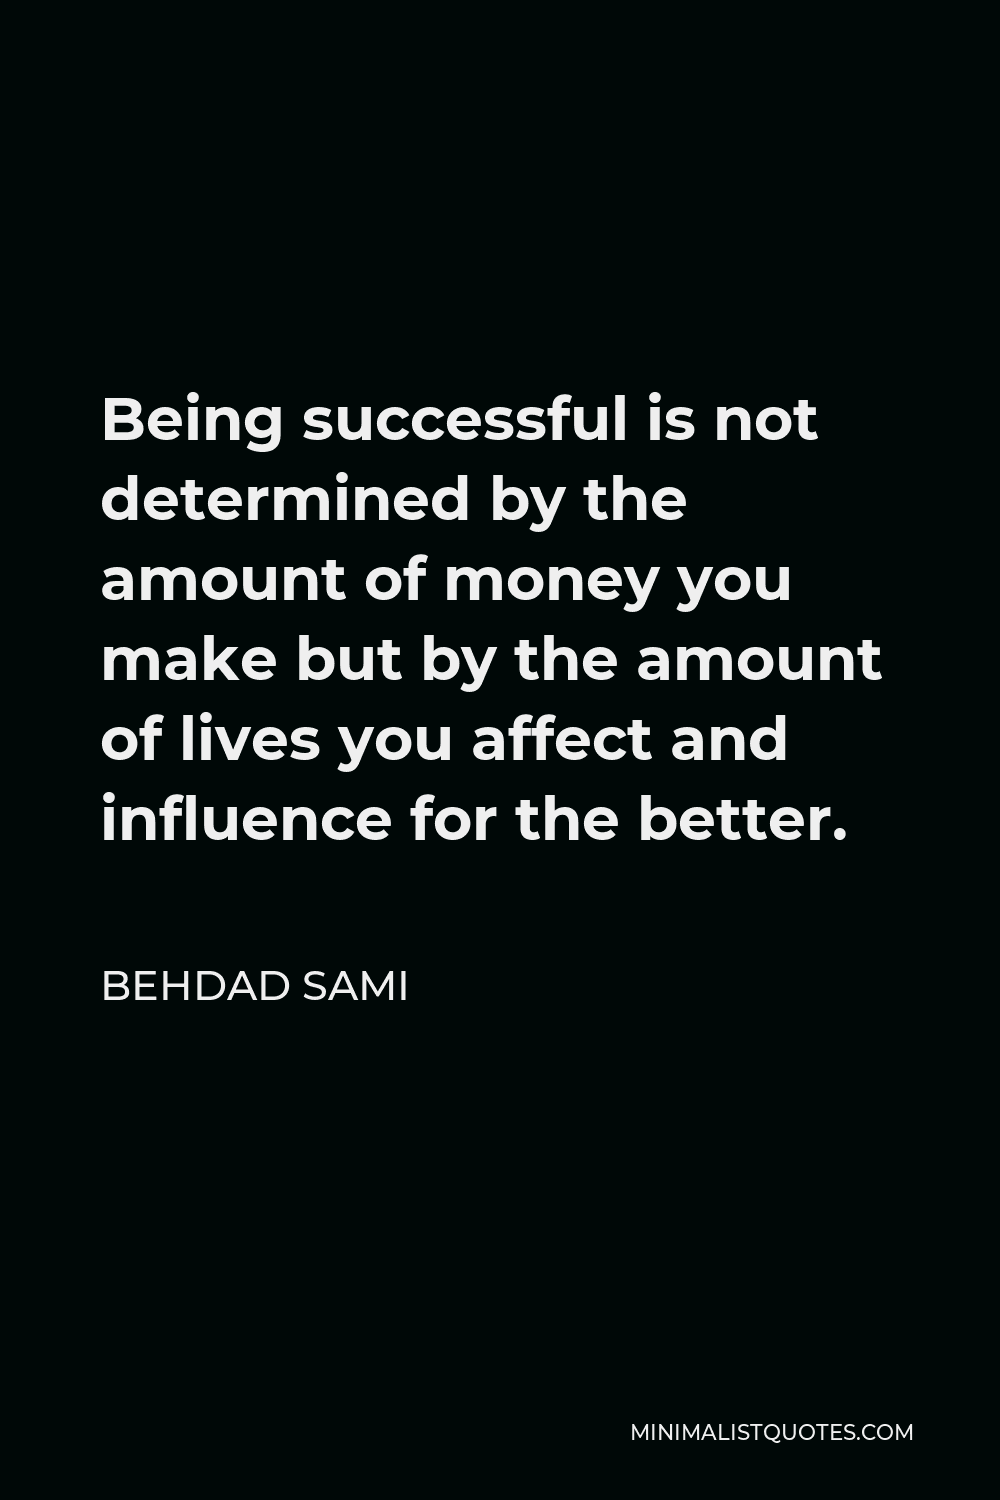 Behdad Sami Quote - Being successful is not determined by the amount of money you make but by the amount of lives you affect and influence for the better.